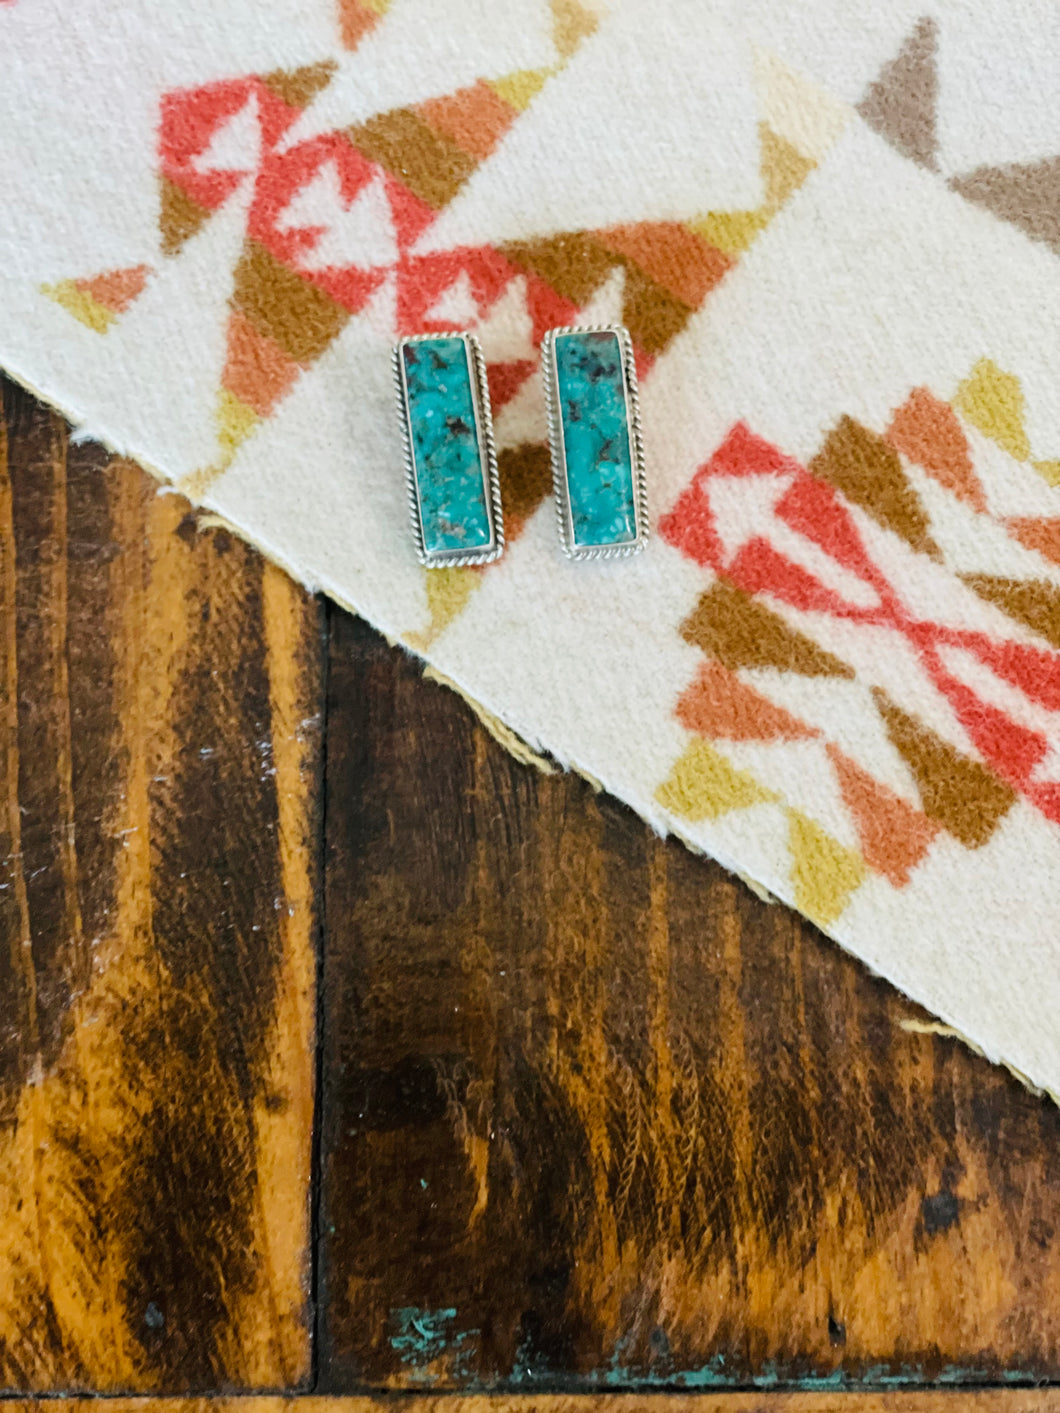 The Las Cruces Earrings